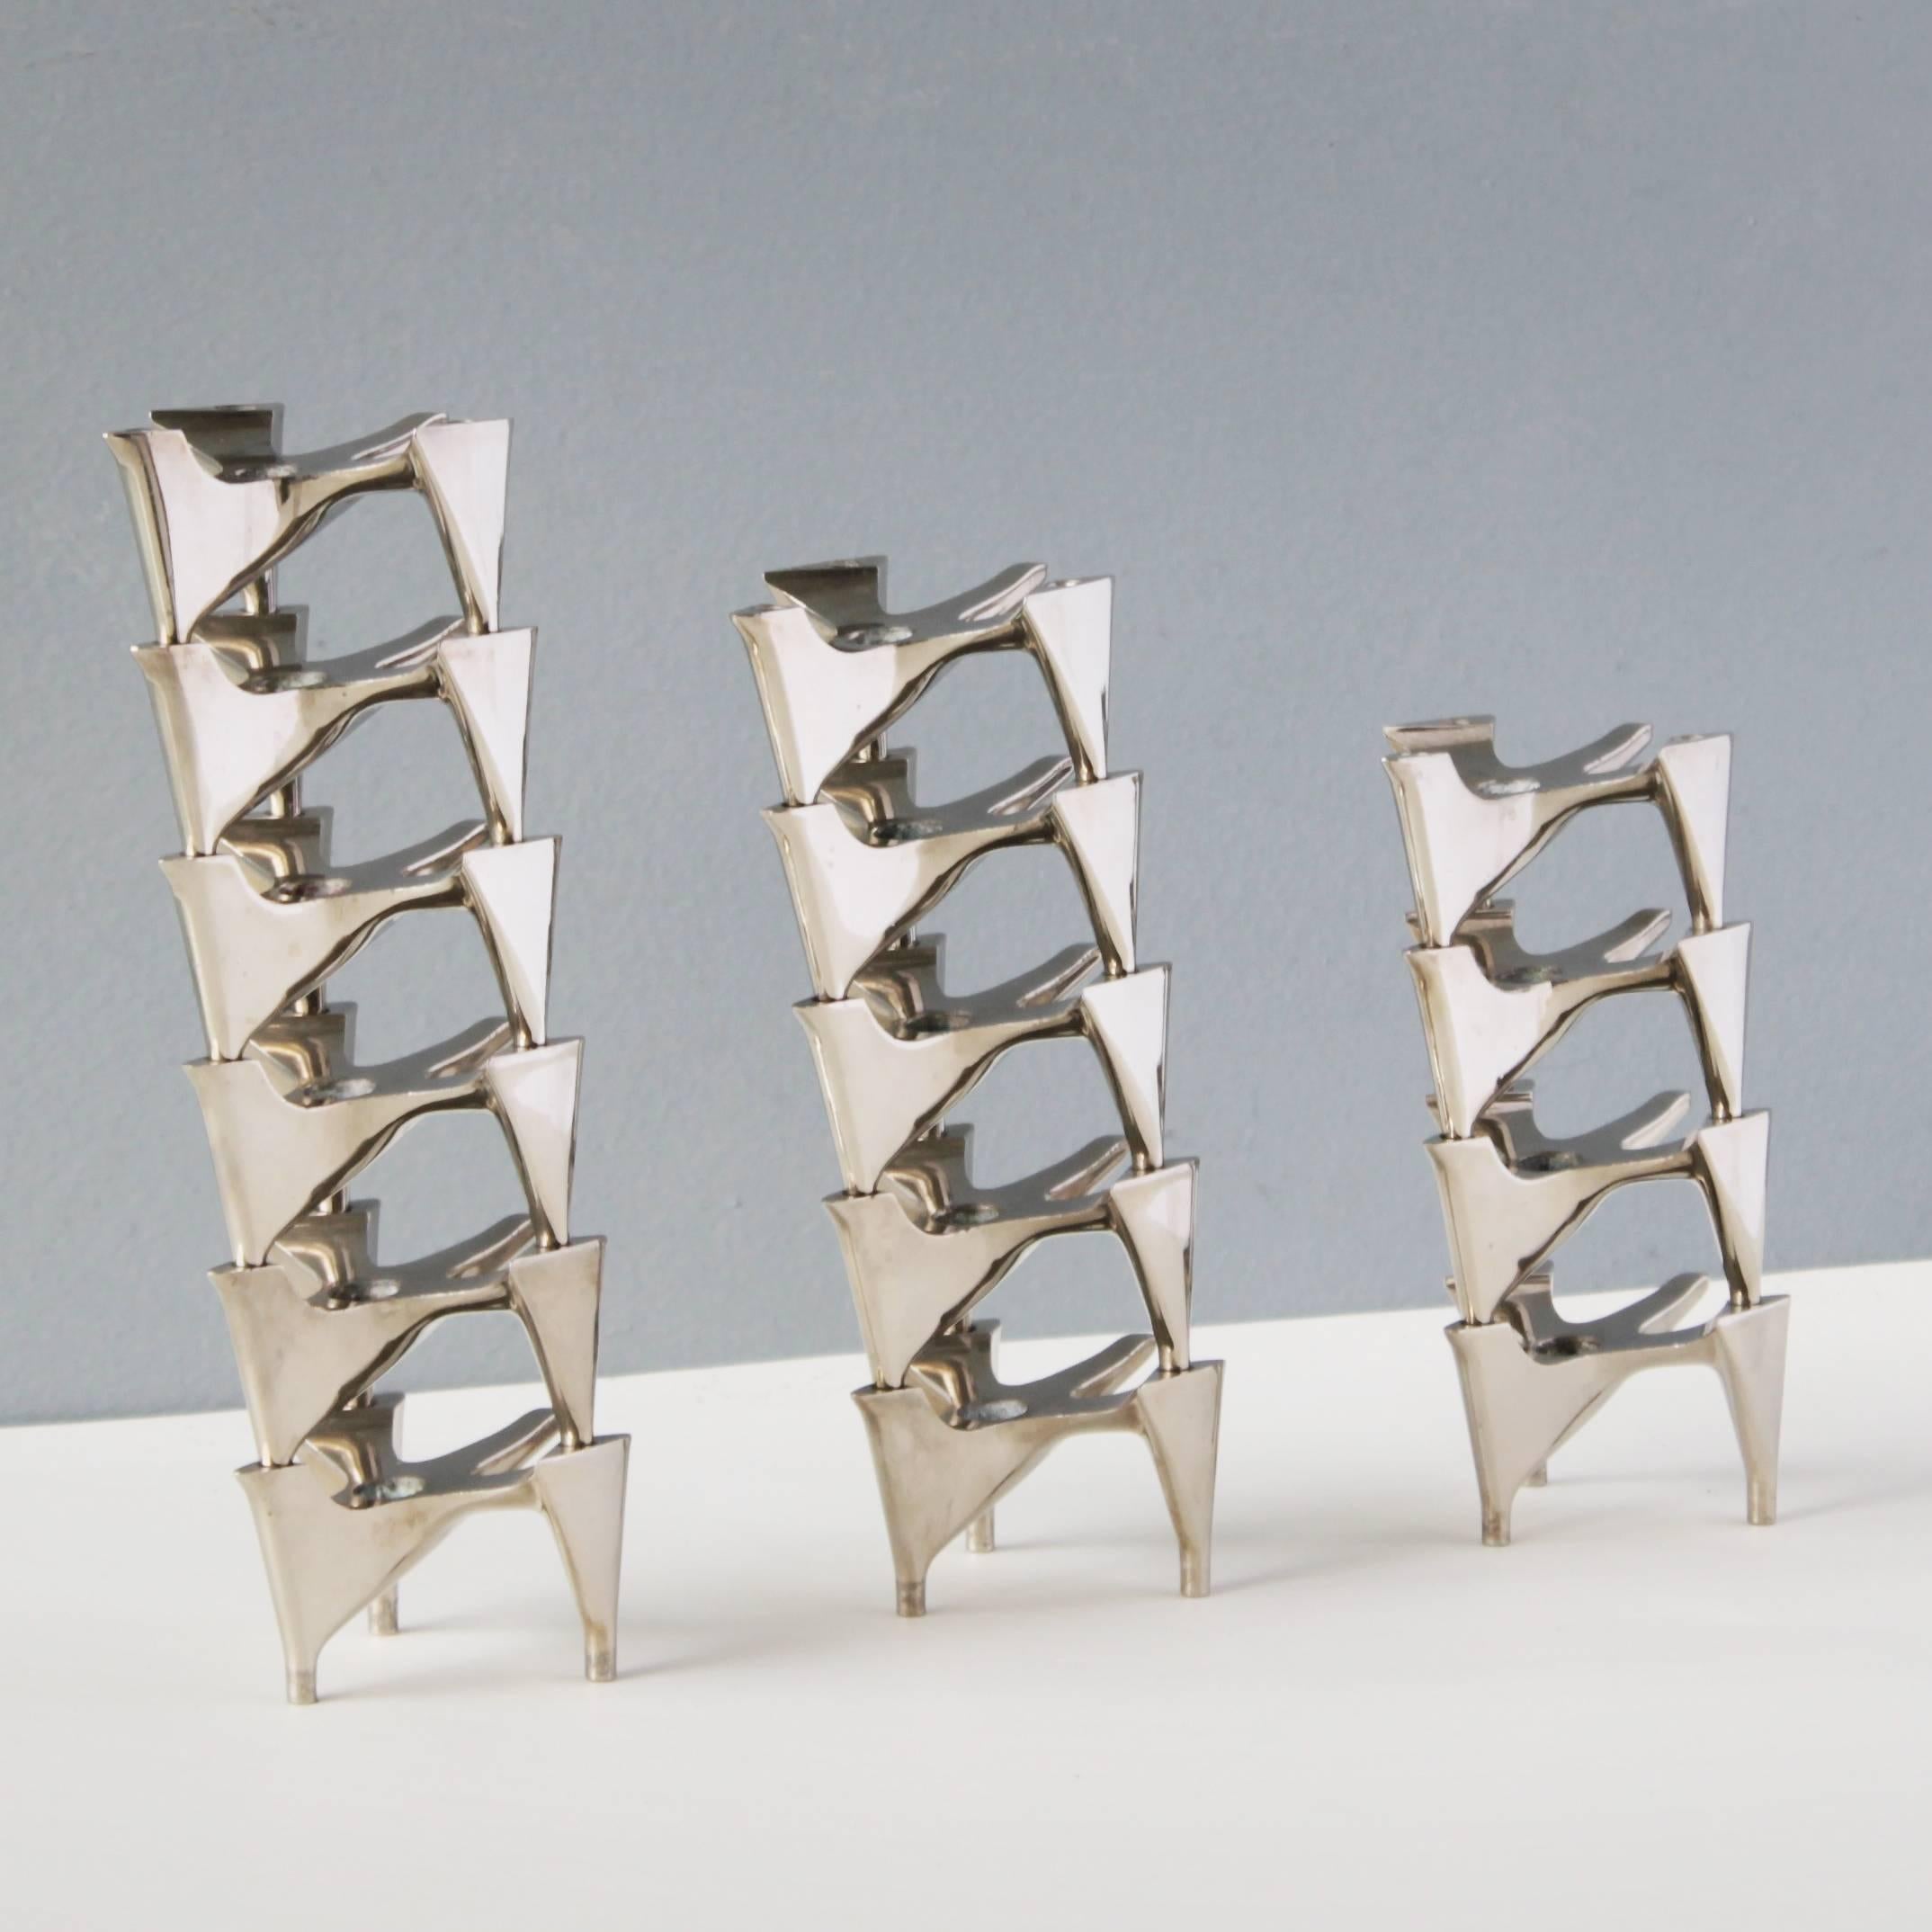 Fifteen (15) 'Vogelflug' (birdflight) candle holders by Hammonia-Motard. A rare set of stackable, chrome-plated candle holders in a beautiful condition.
Dimensions of a piece: Depth 3.5 in. (8.8 cm), width 2.8 in. (7 cm), height 2.0 inches (5